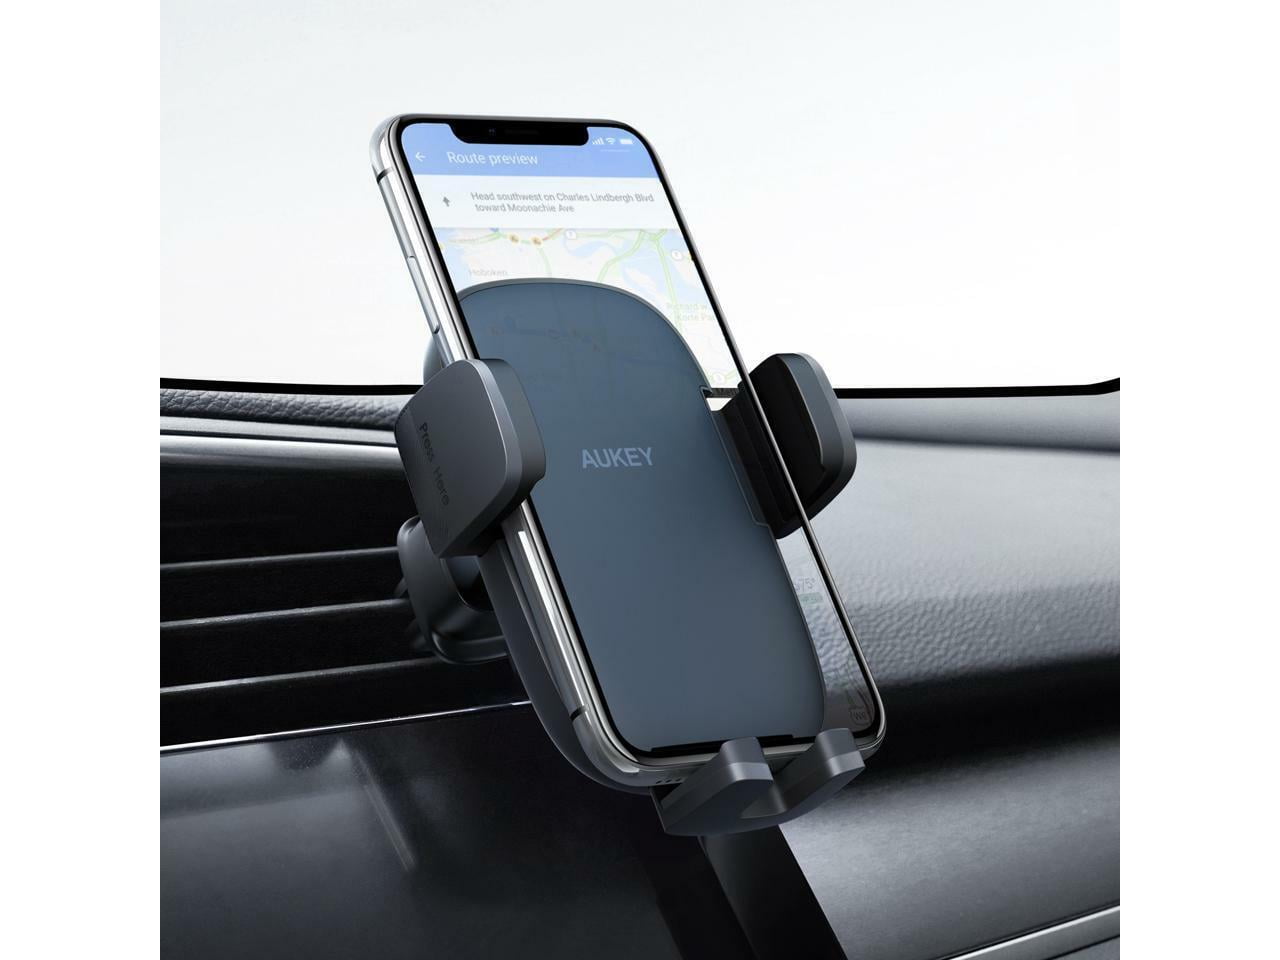 AUKEY Car Phone Mount Upgraded Vent Clip for Air Vent HD C58 